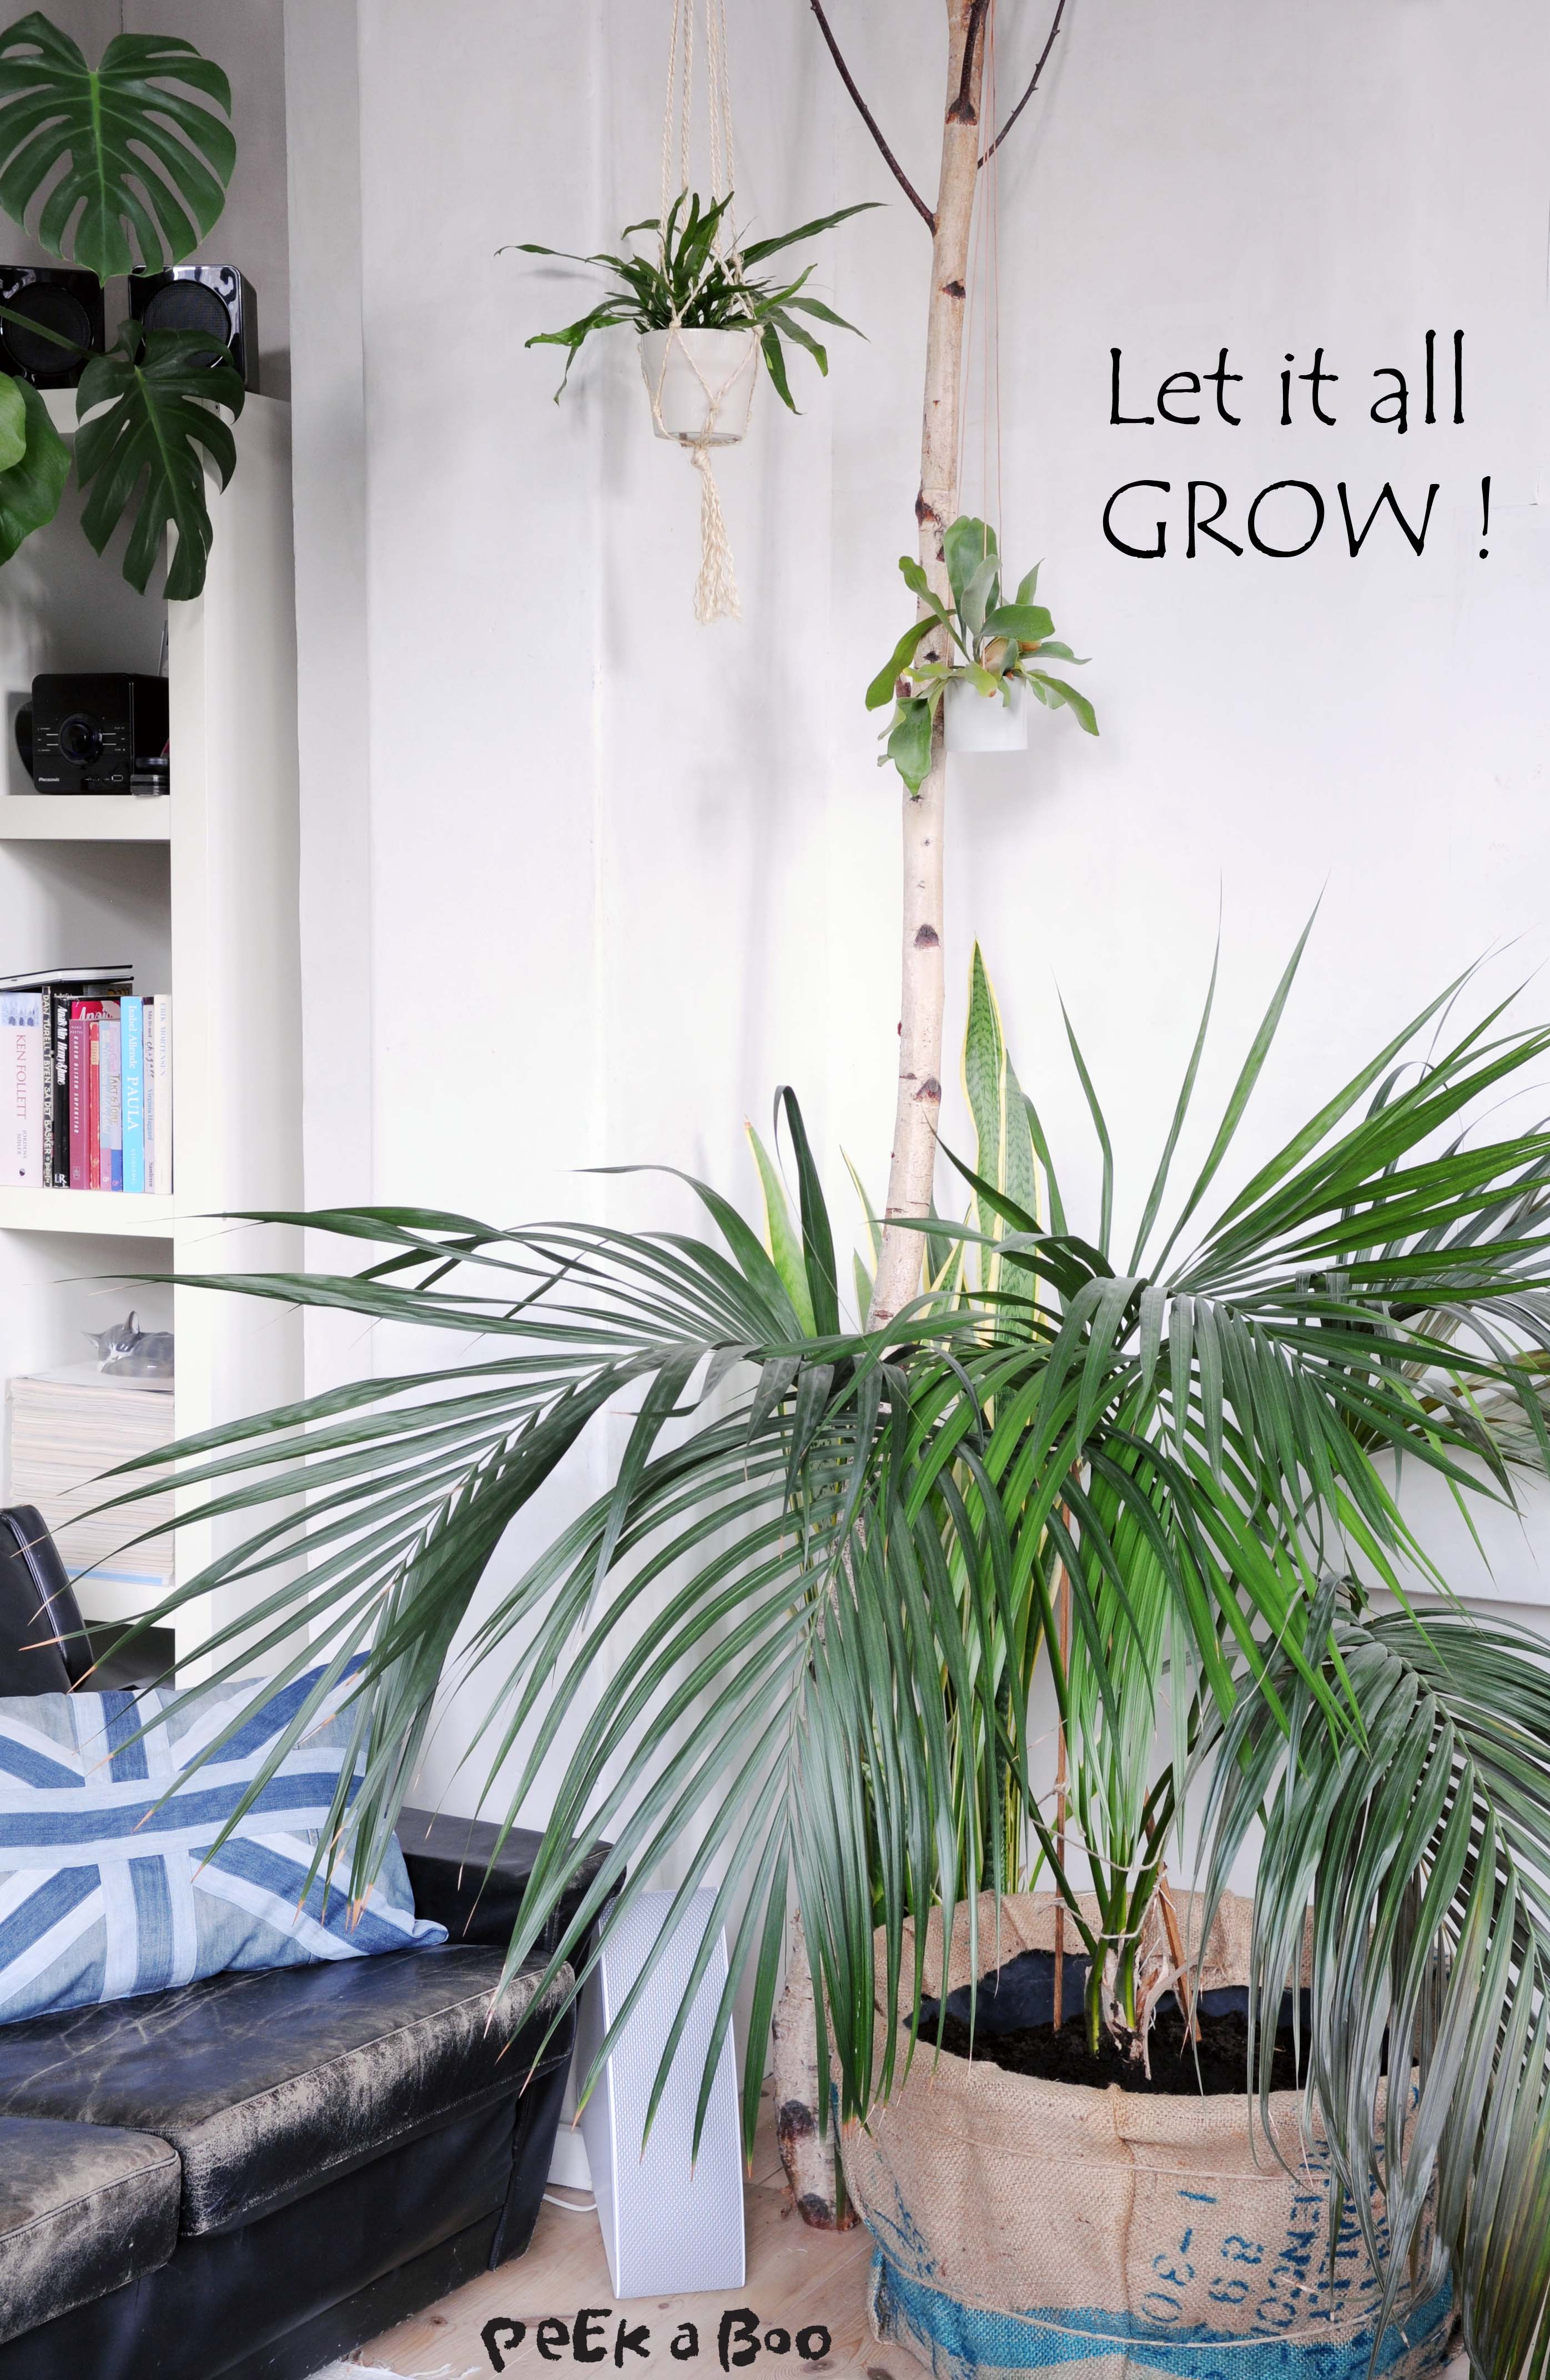 Green Living in your livingroom, makes the air in your room cleaner, and living with plants makes you happier. It's been proven, so go make your place a better and greener home.